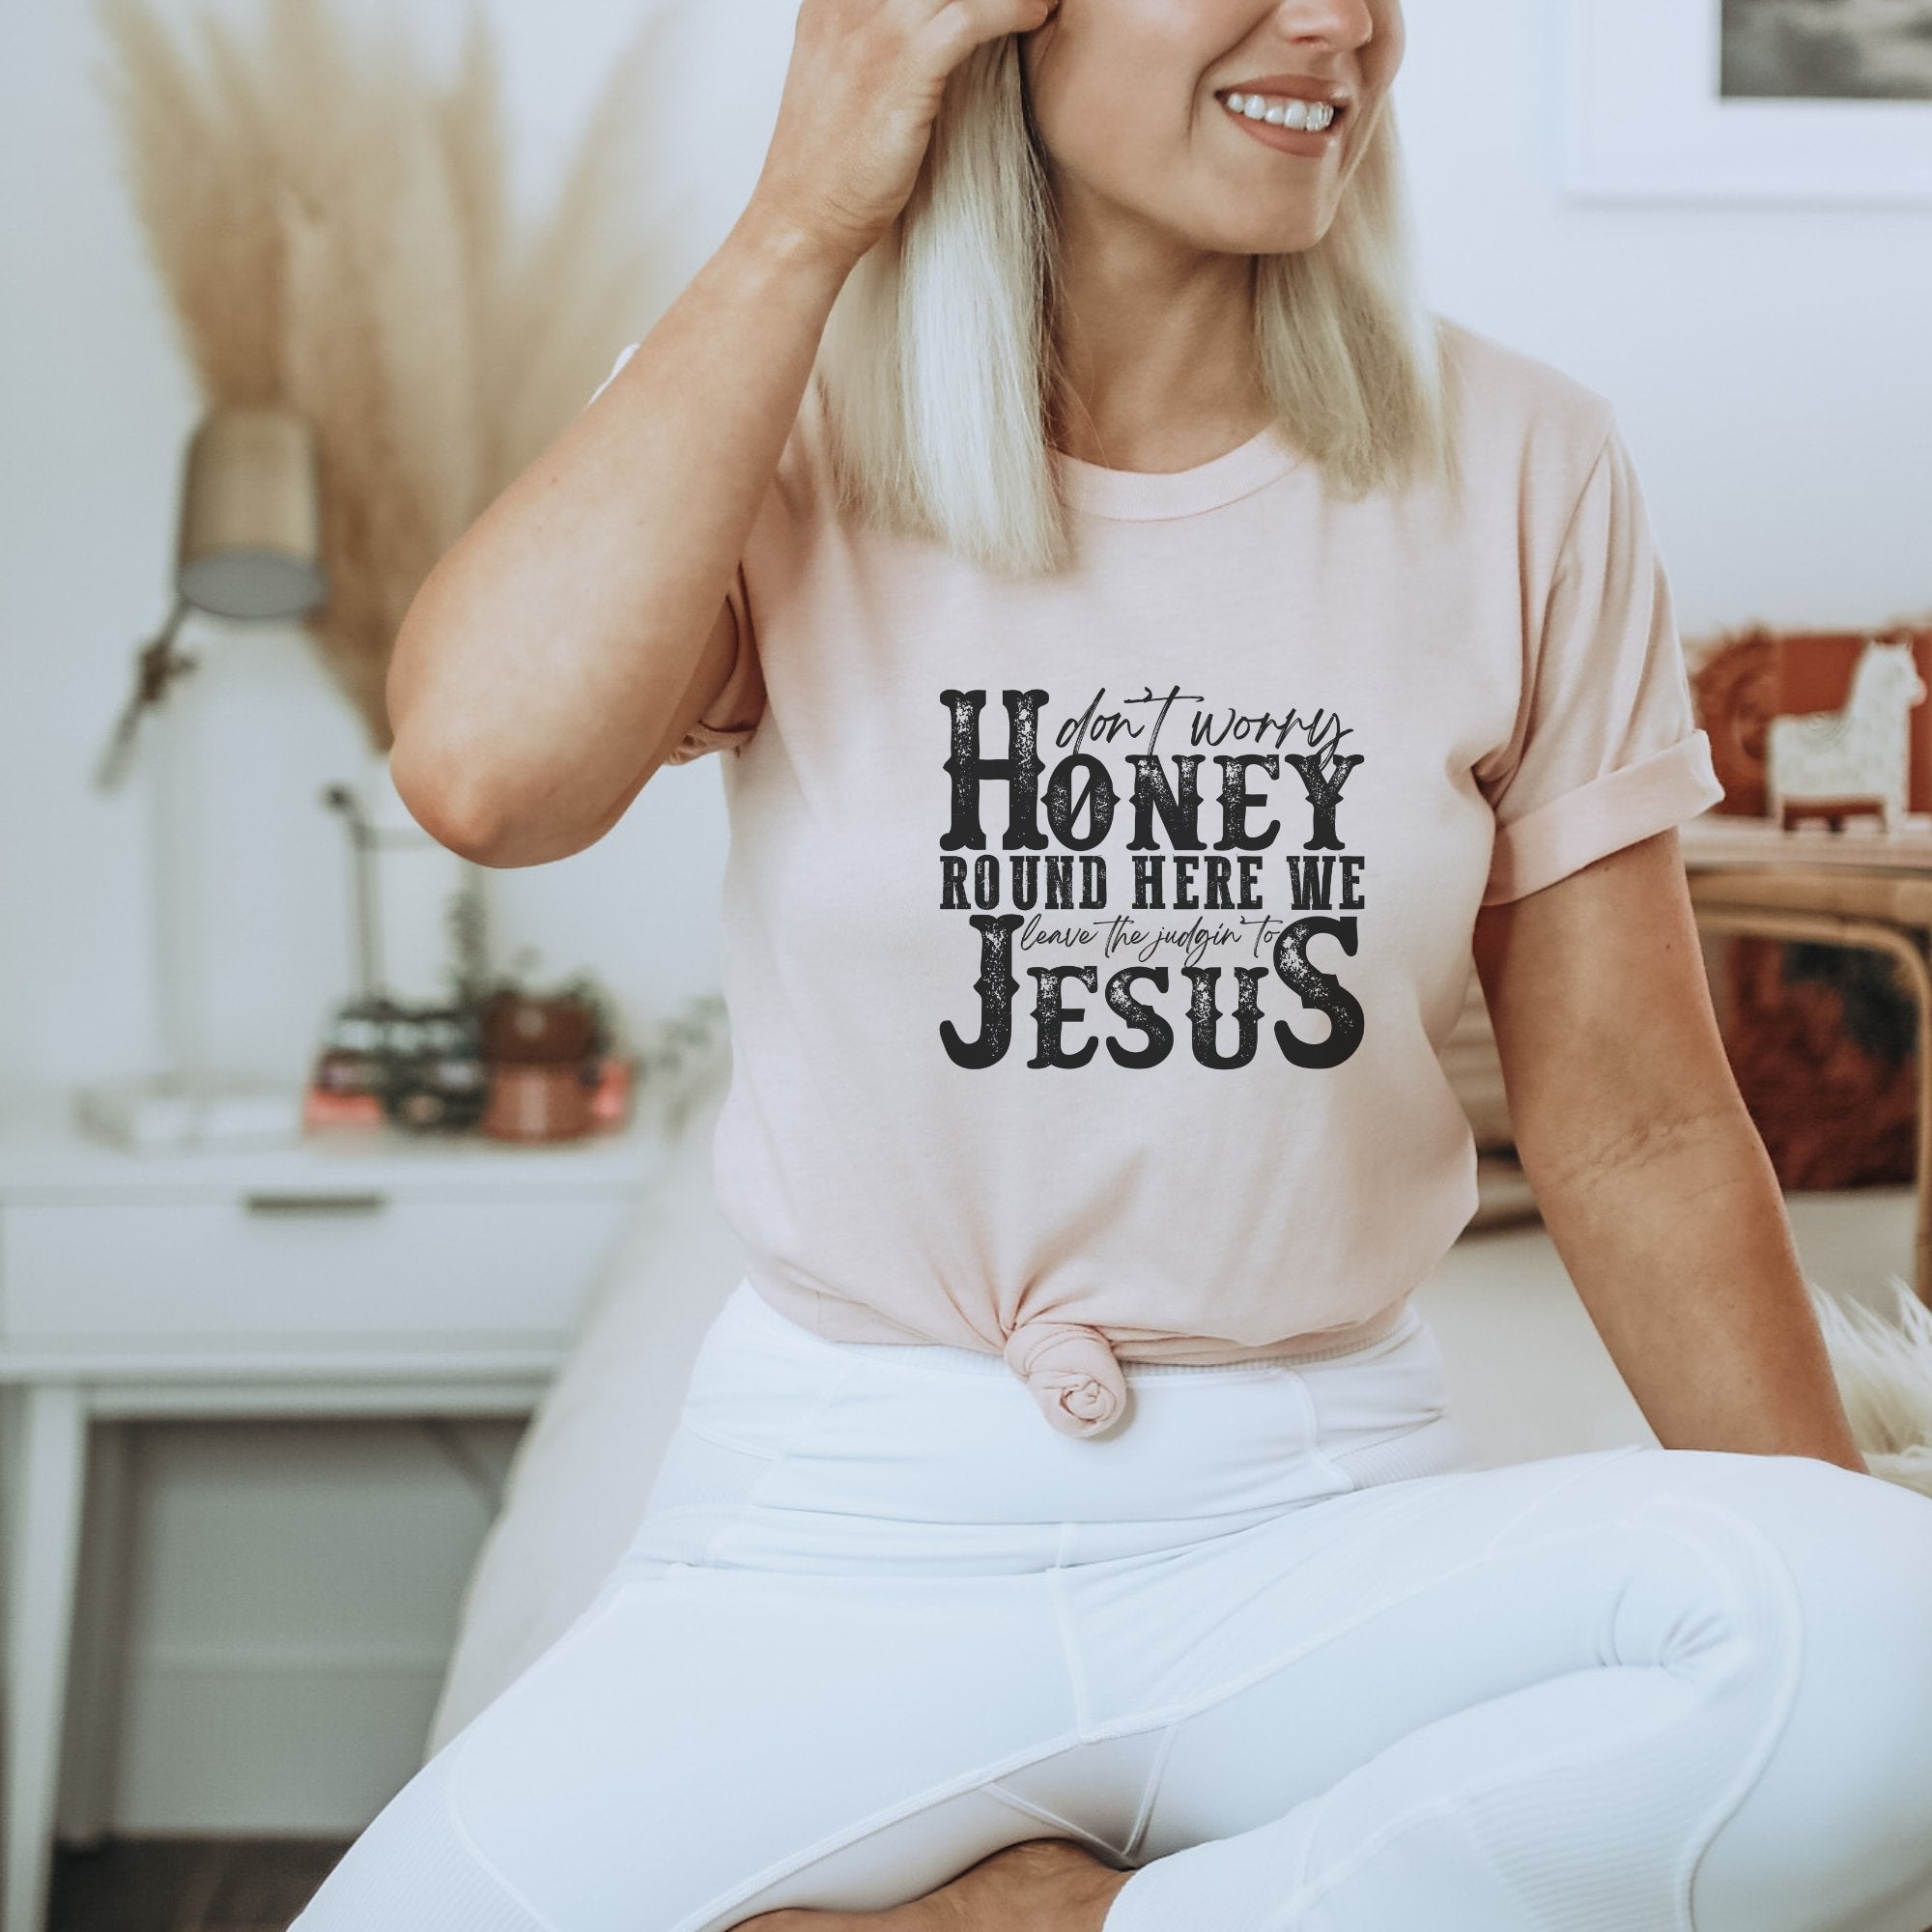 Leave the Judgin to Jesus Western Graphic Tee - Trendznmore